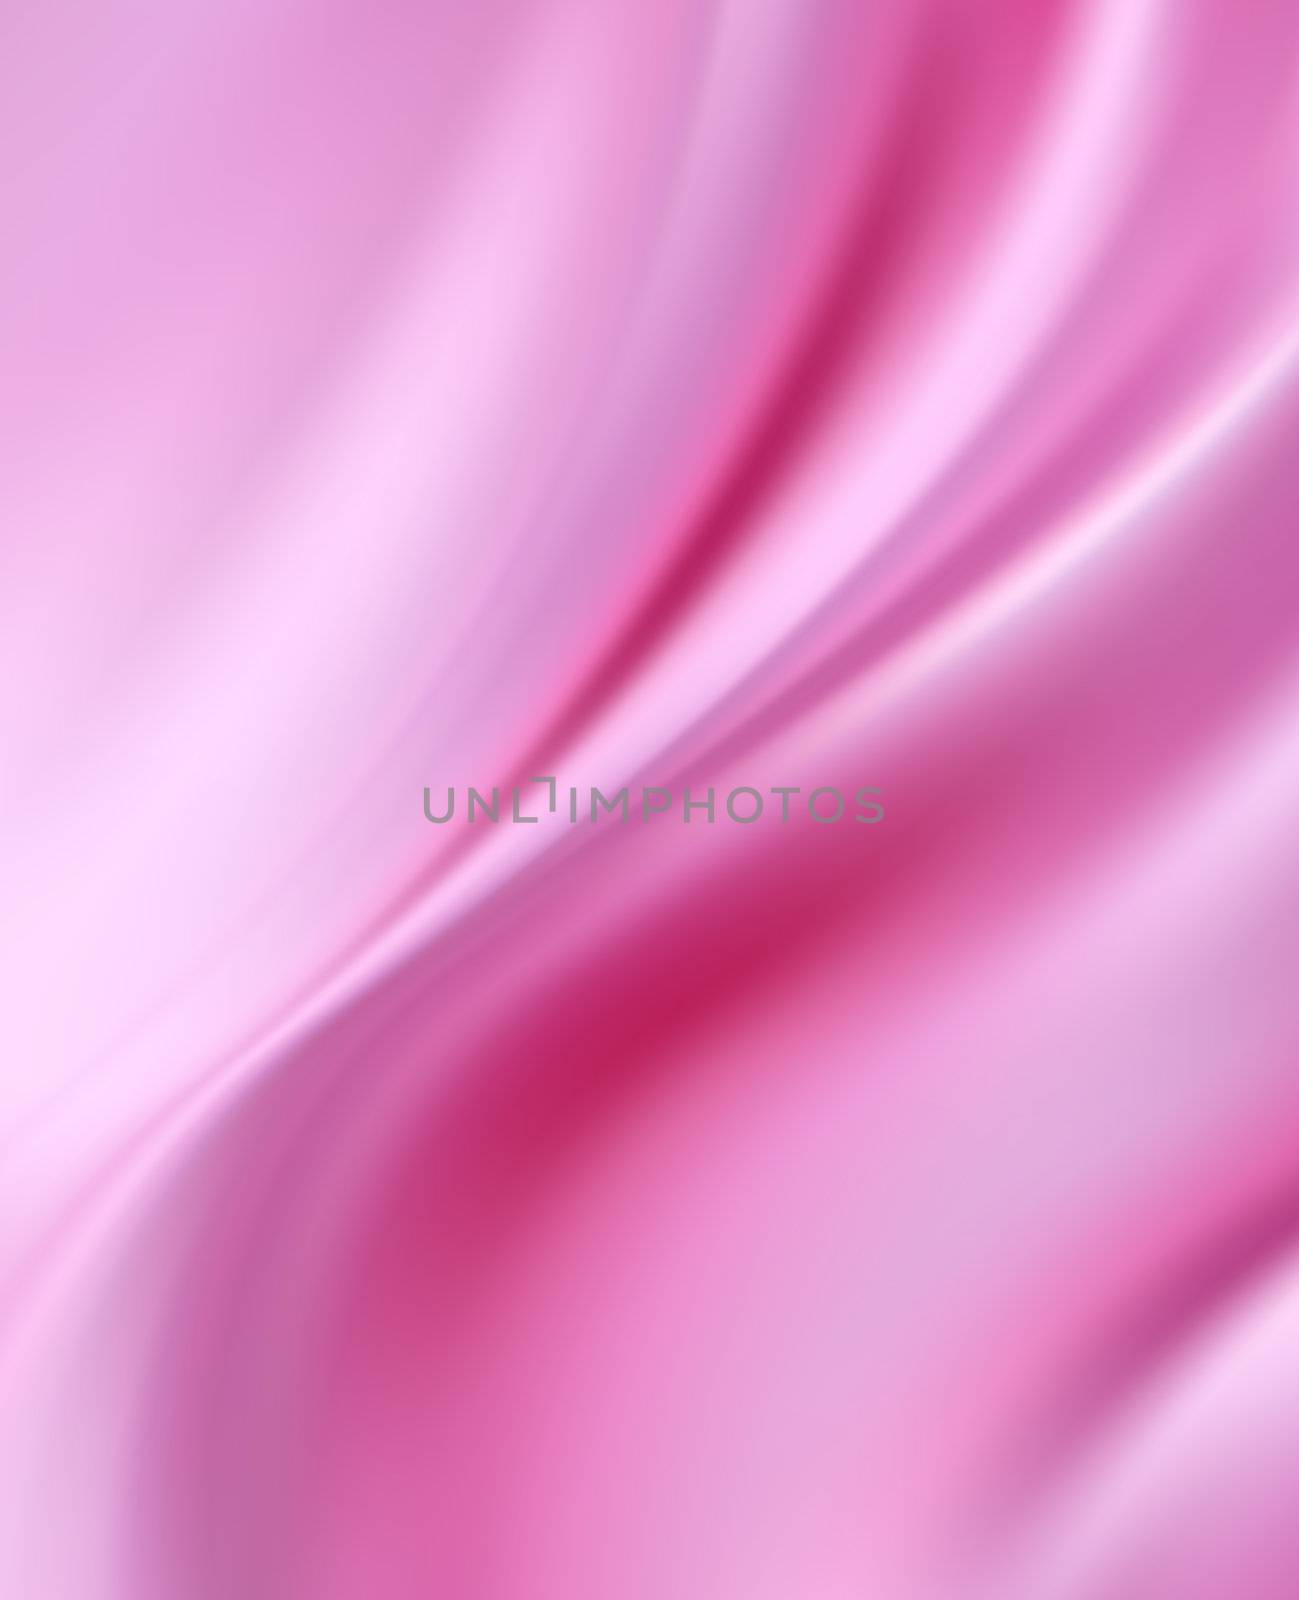 Pink Silk Background by epic33